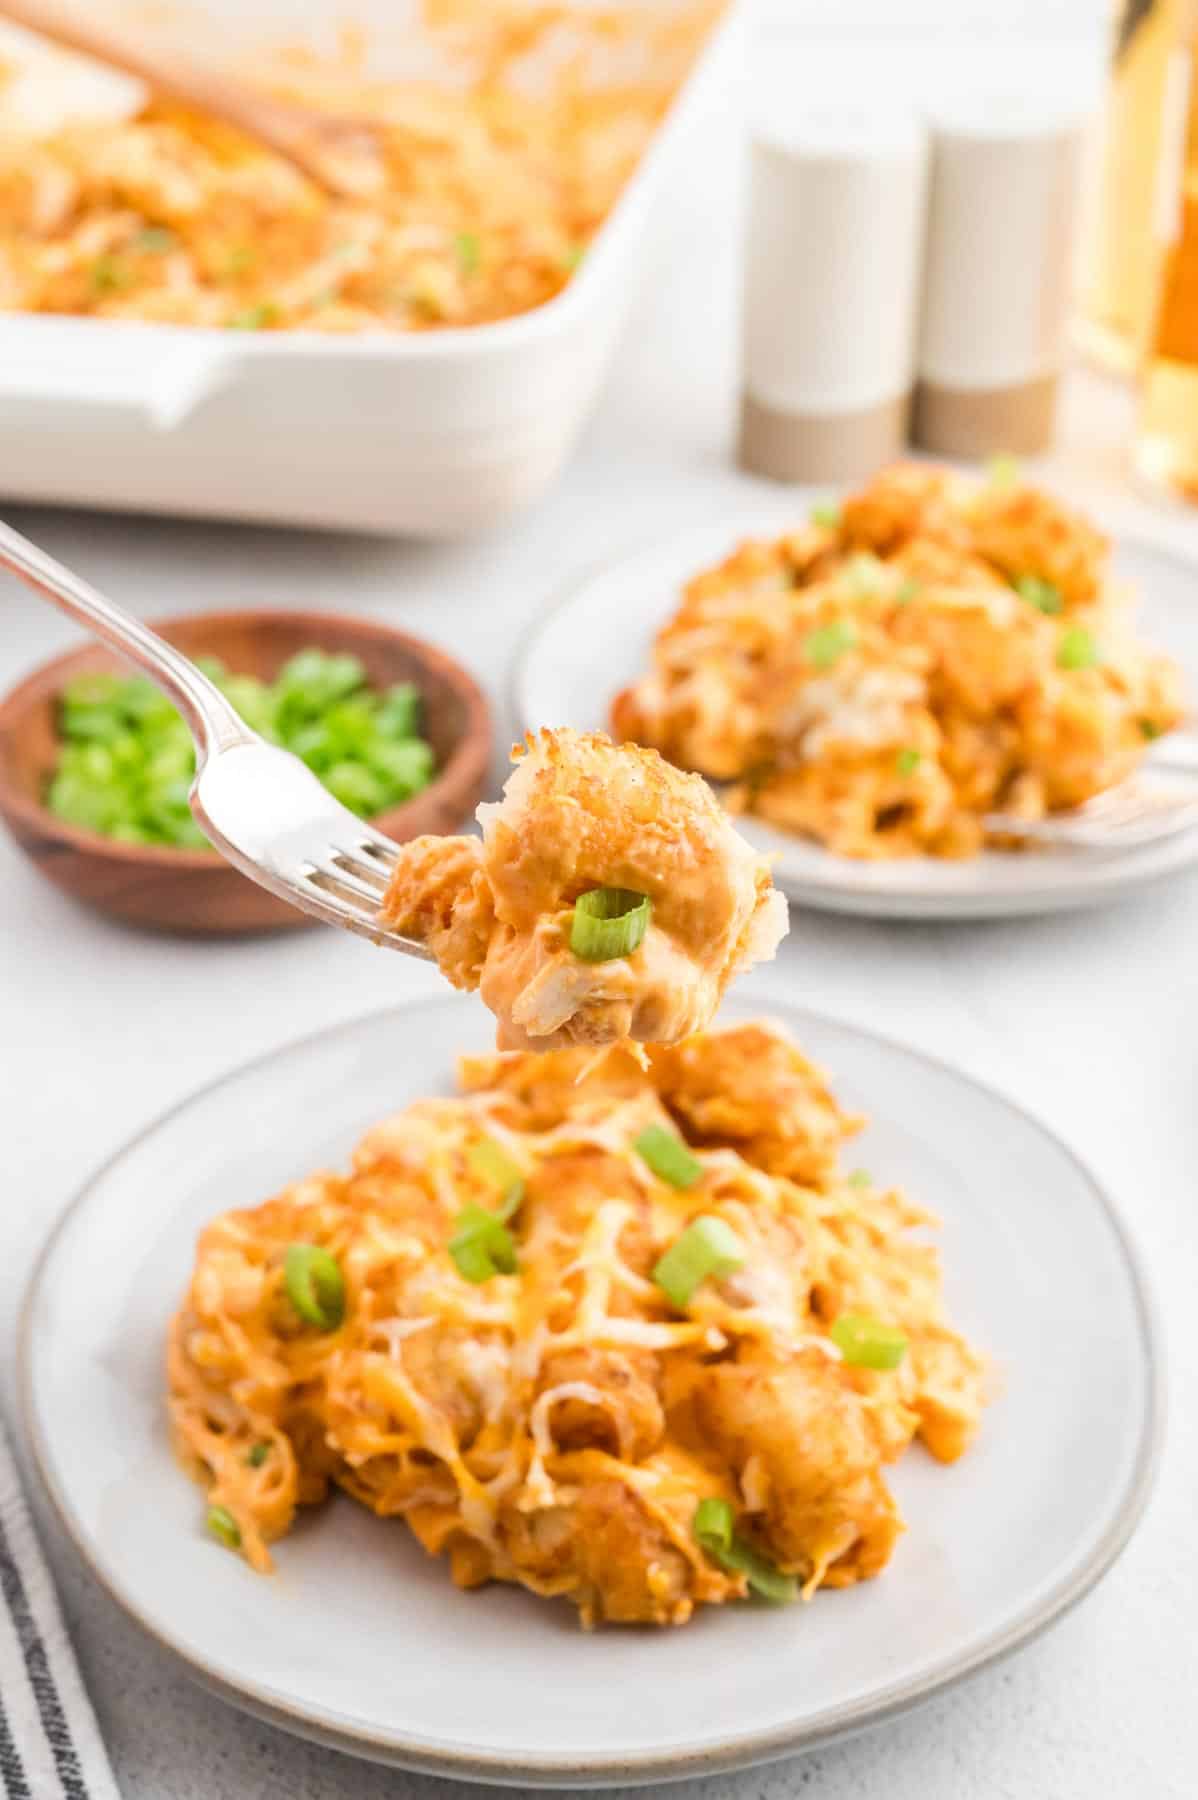 Buffalo Chicken Tater Tot Casserole is an easy family friendly dinner recipe  loaded with rotisserie chicken, cream of chicken soup, cream cheese, ranch dressing, Frank's Red Hot, tater tots, shredded cheese and chopped green onions.